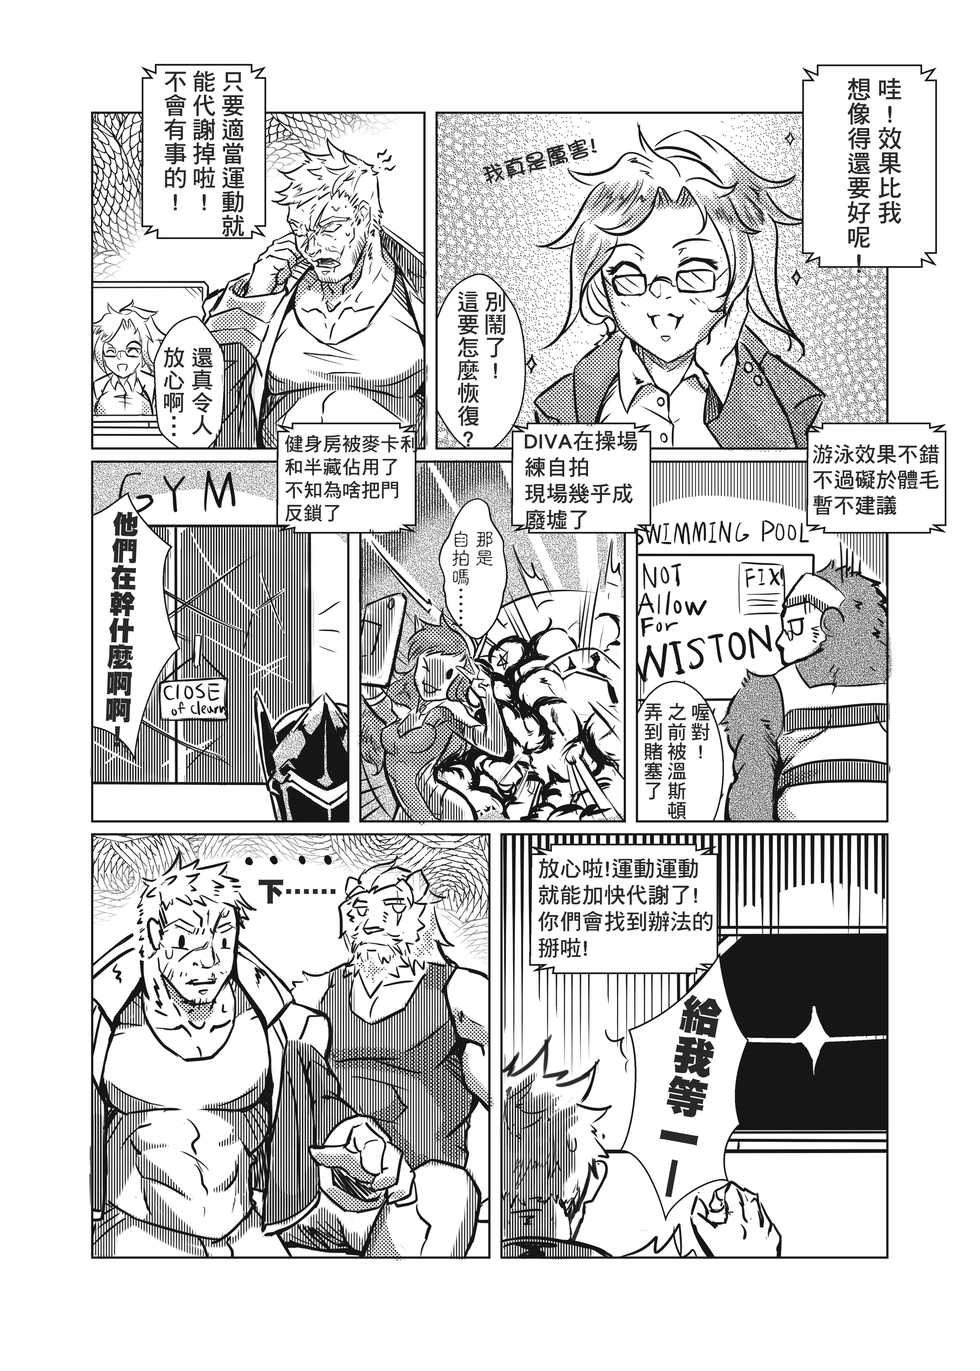 [Lander] Strange Things Happened (Overwatch) [Chinese] - Page 8